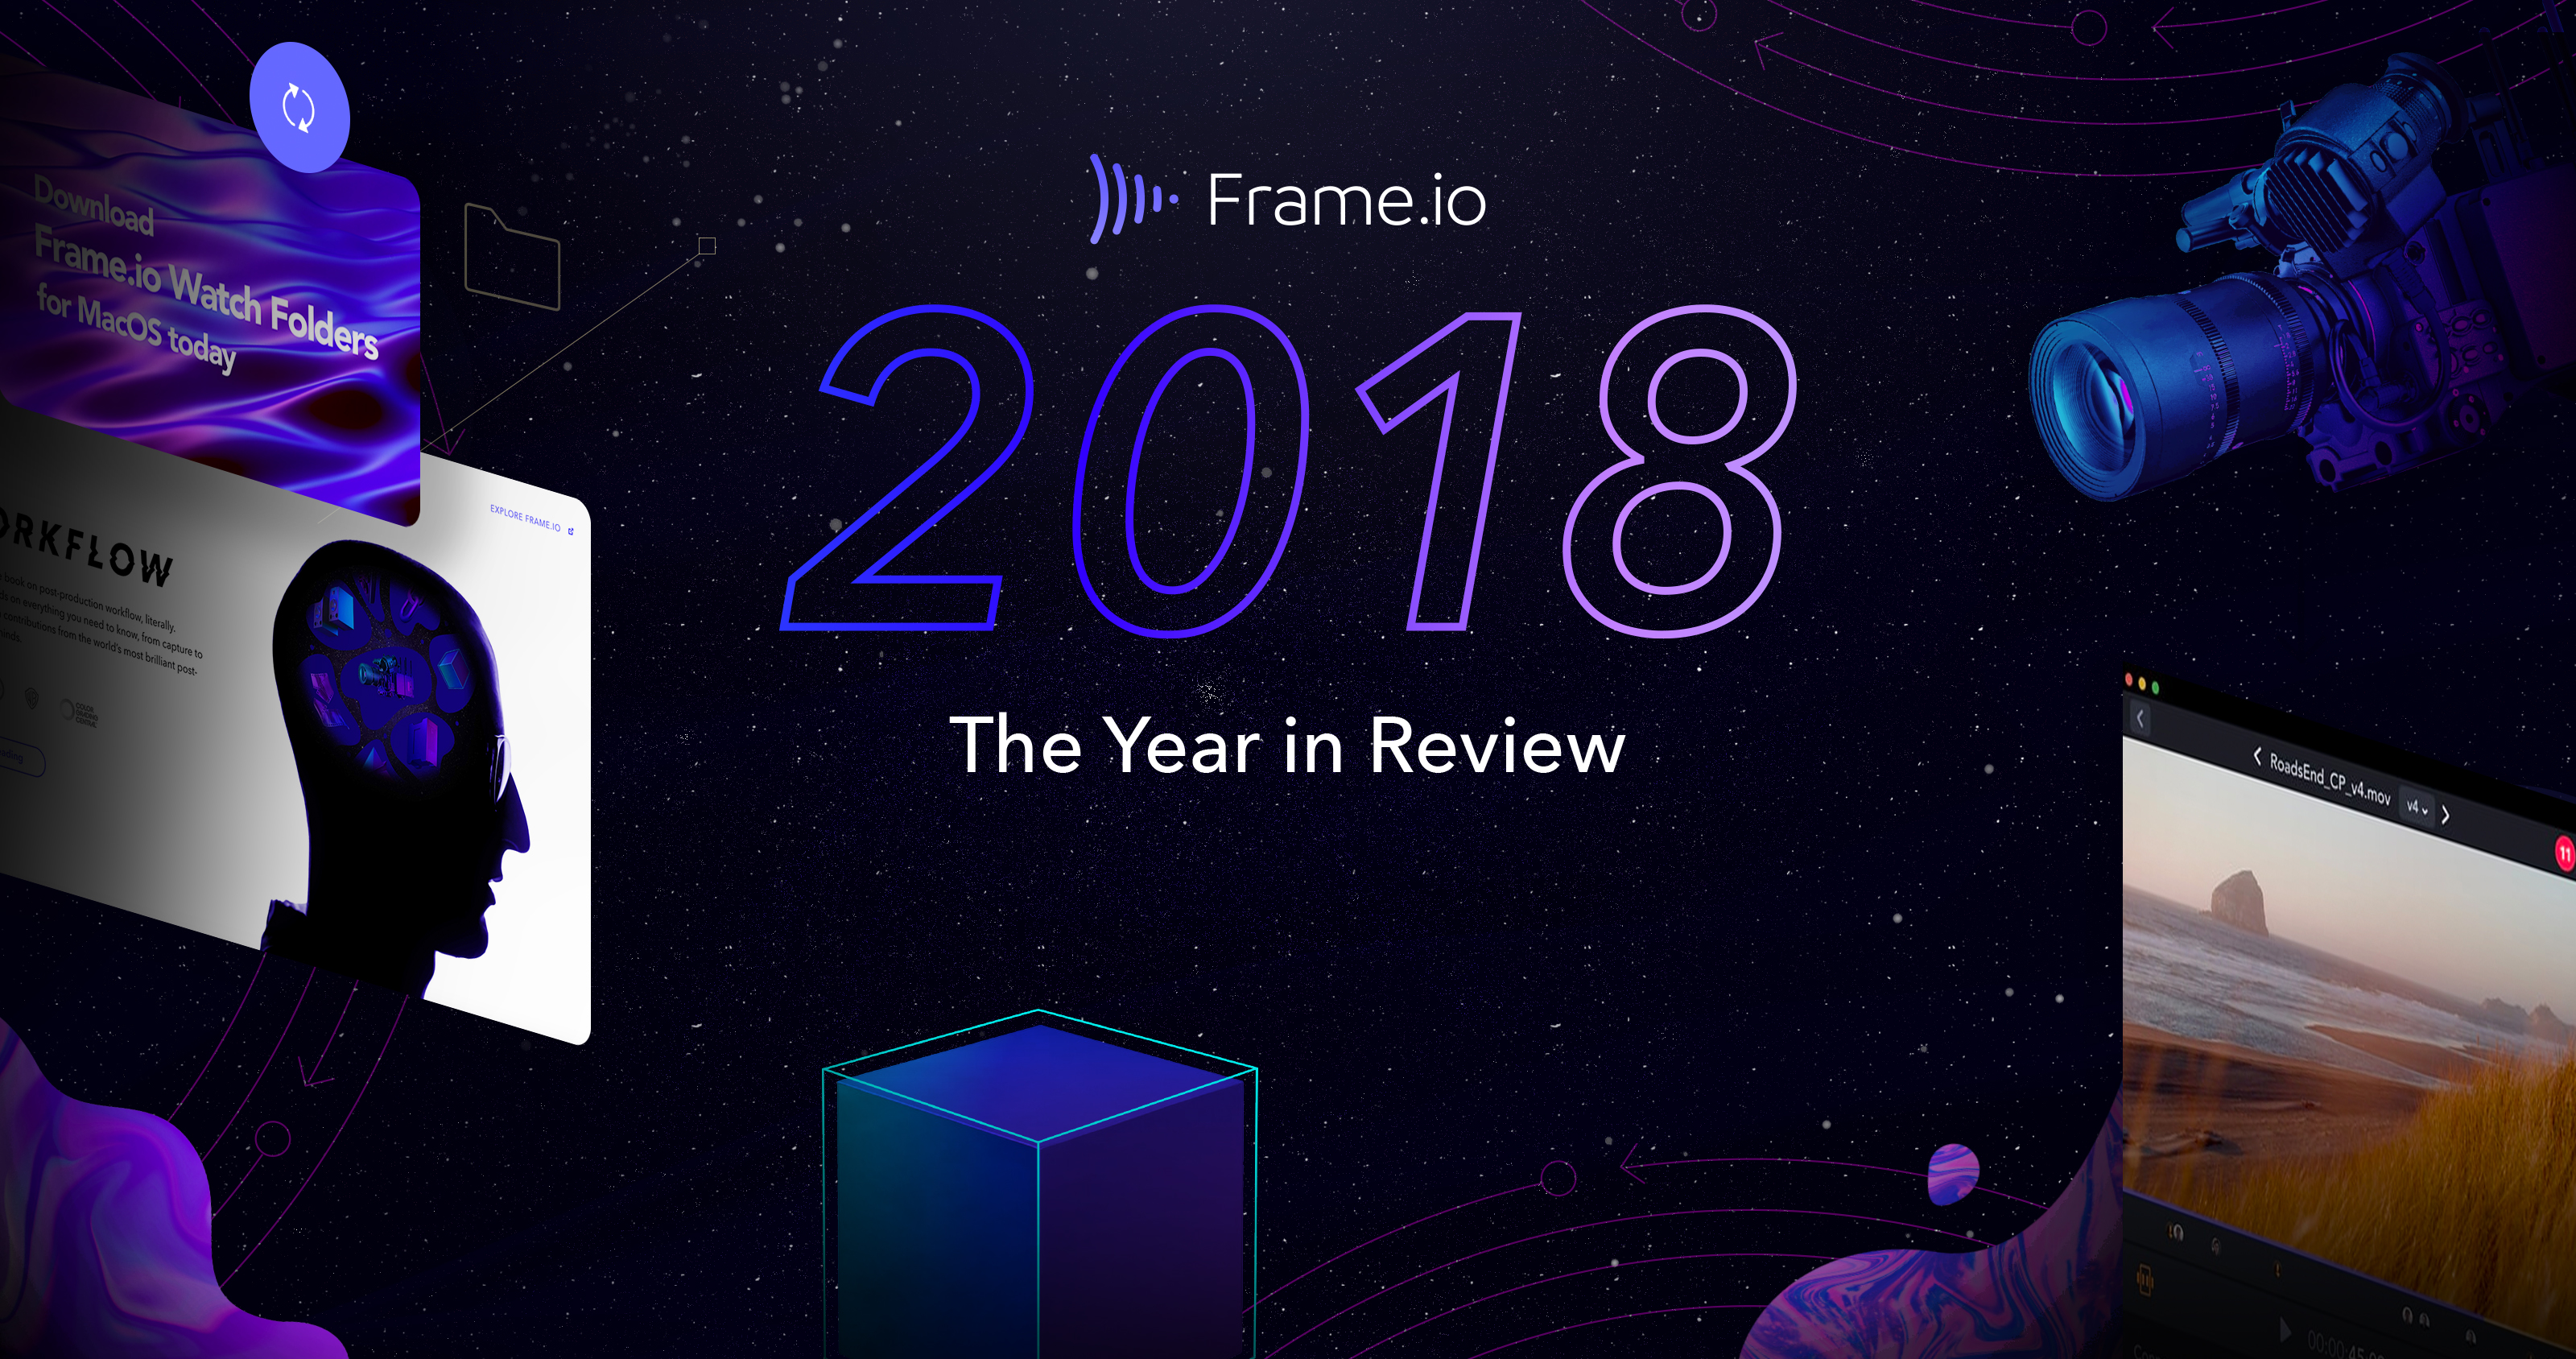 Our 2018 Year in Review. A Faster, Smarter, Sleeker Frame.io